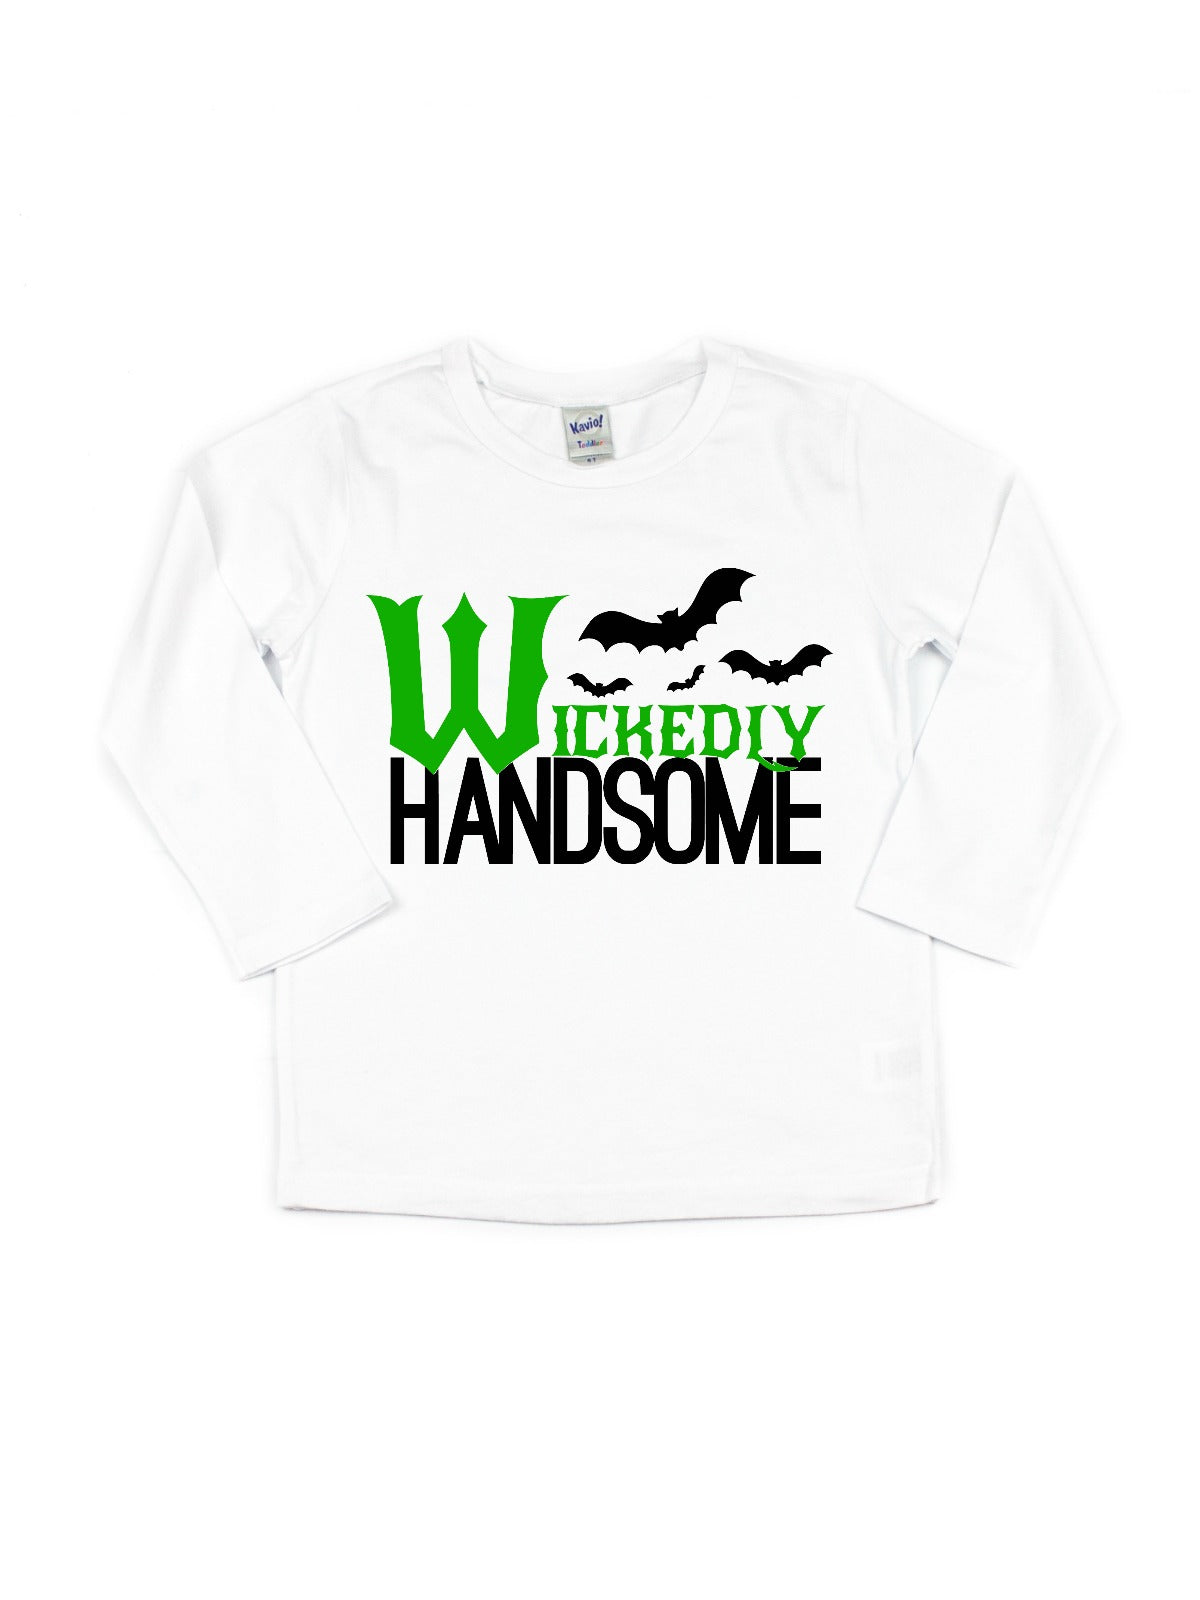 wickedly handsome boys halloween shirt